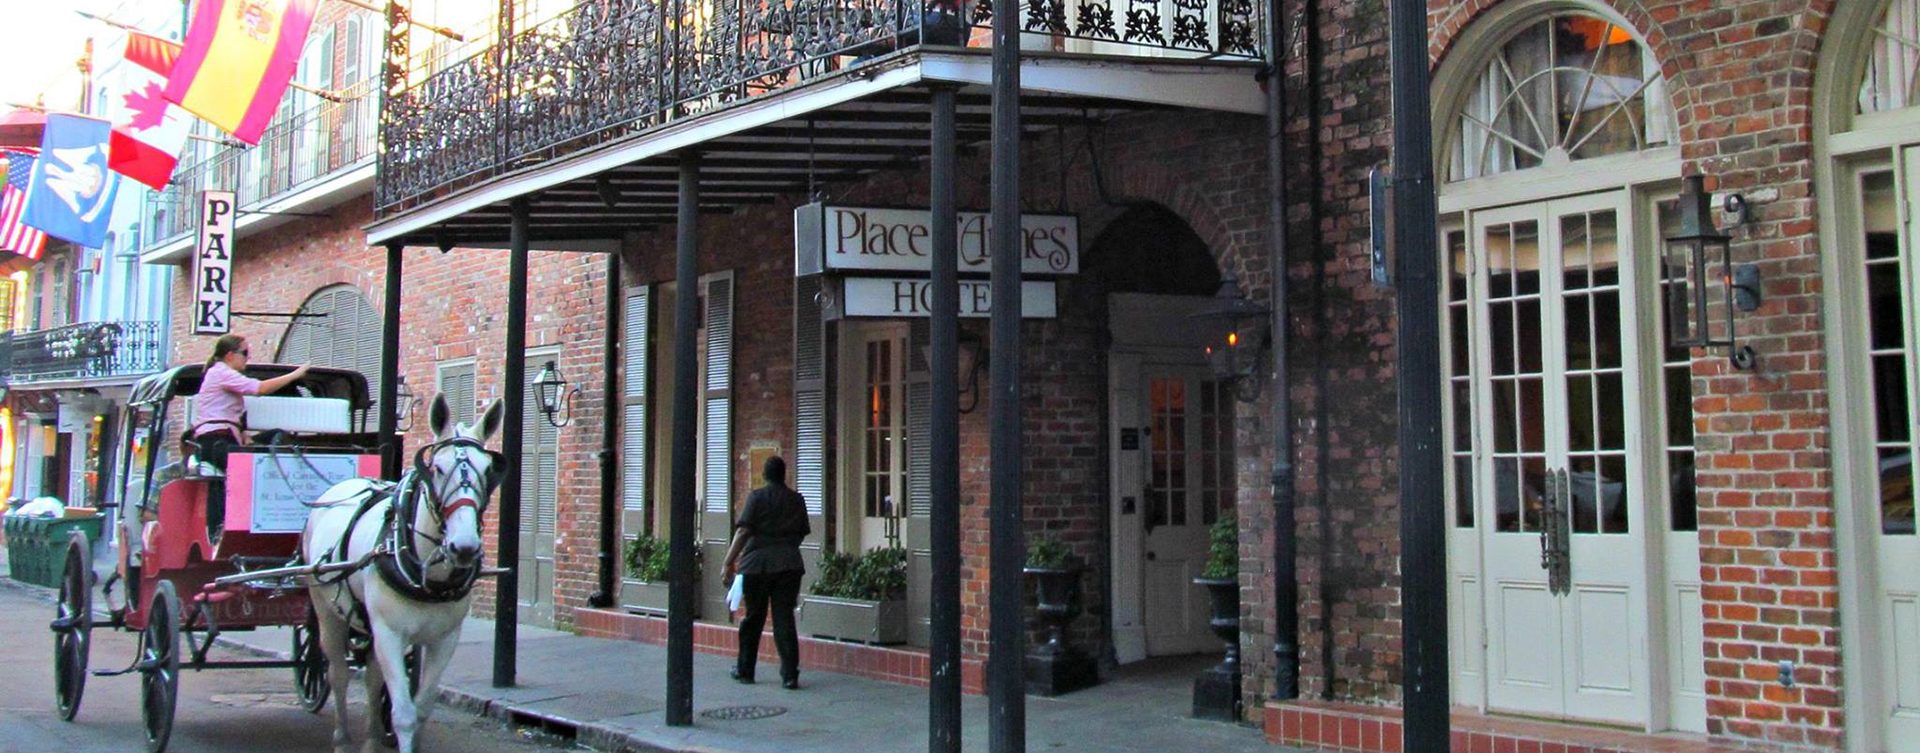 Place D Armes Hotel French Quarter Hotel Specials Discount Rates Downtown New Orleans